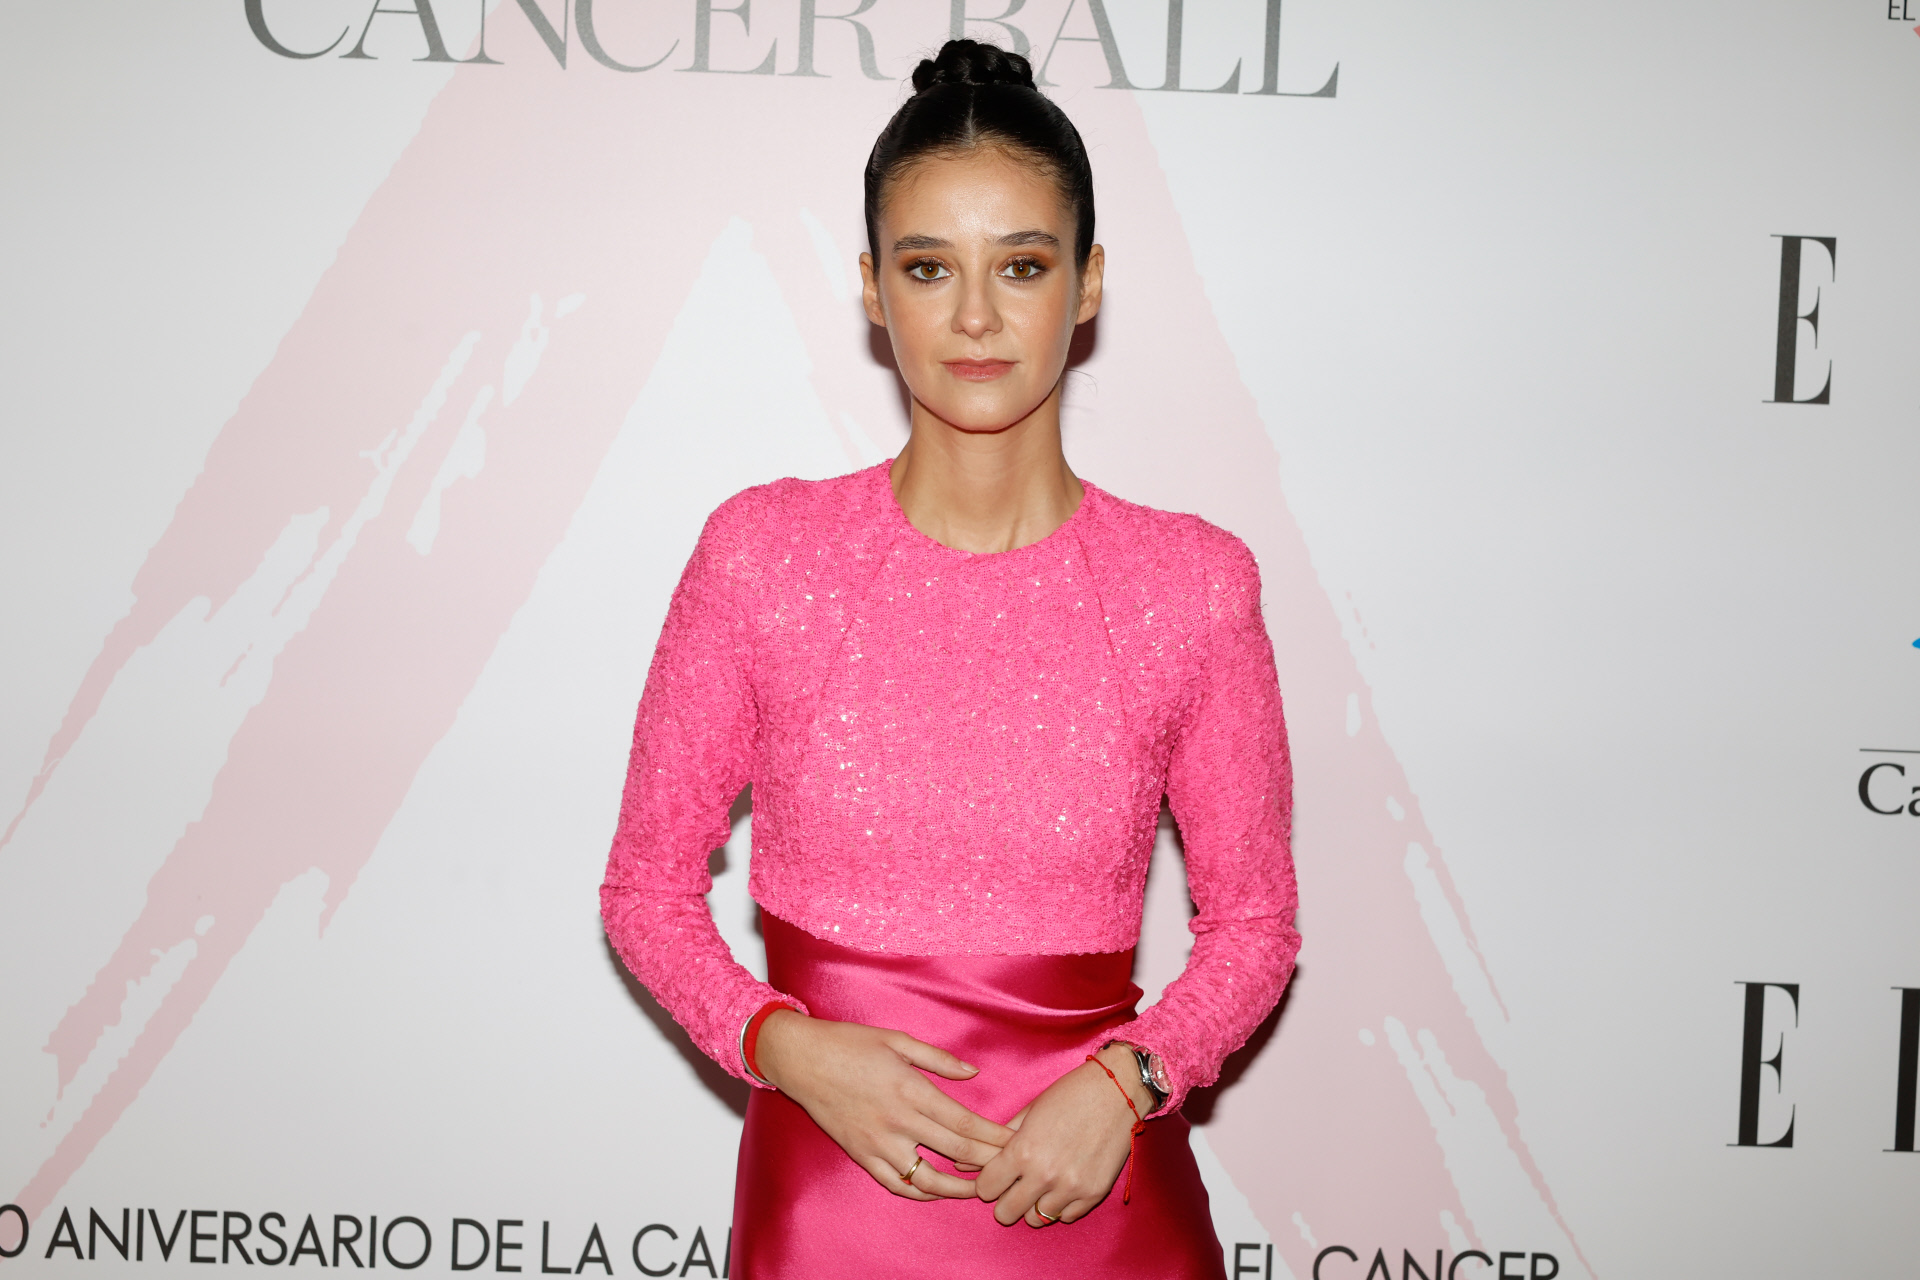 Victoria Federica at an event against cancer